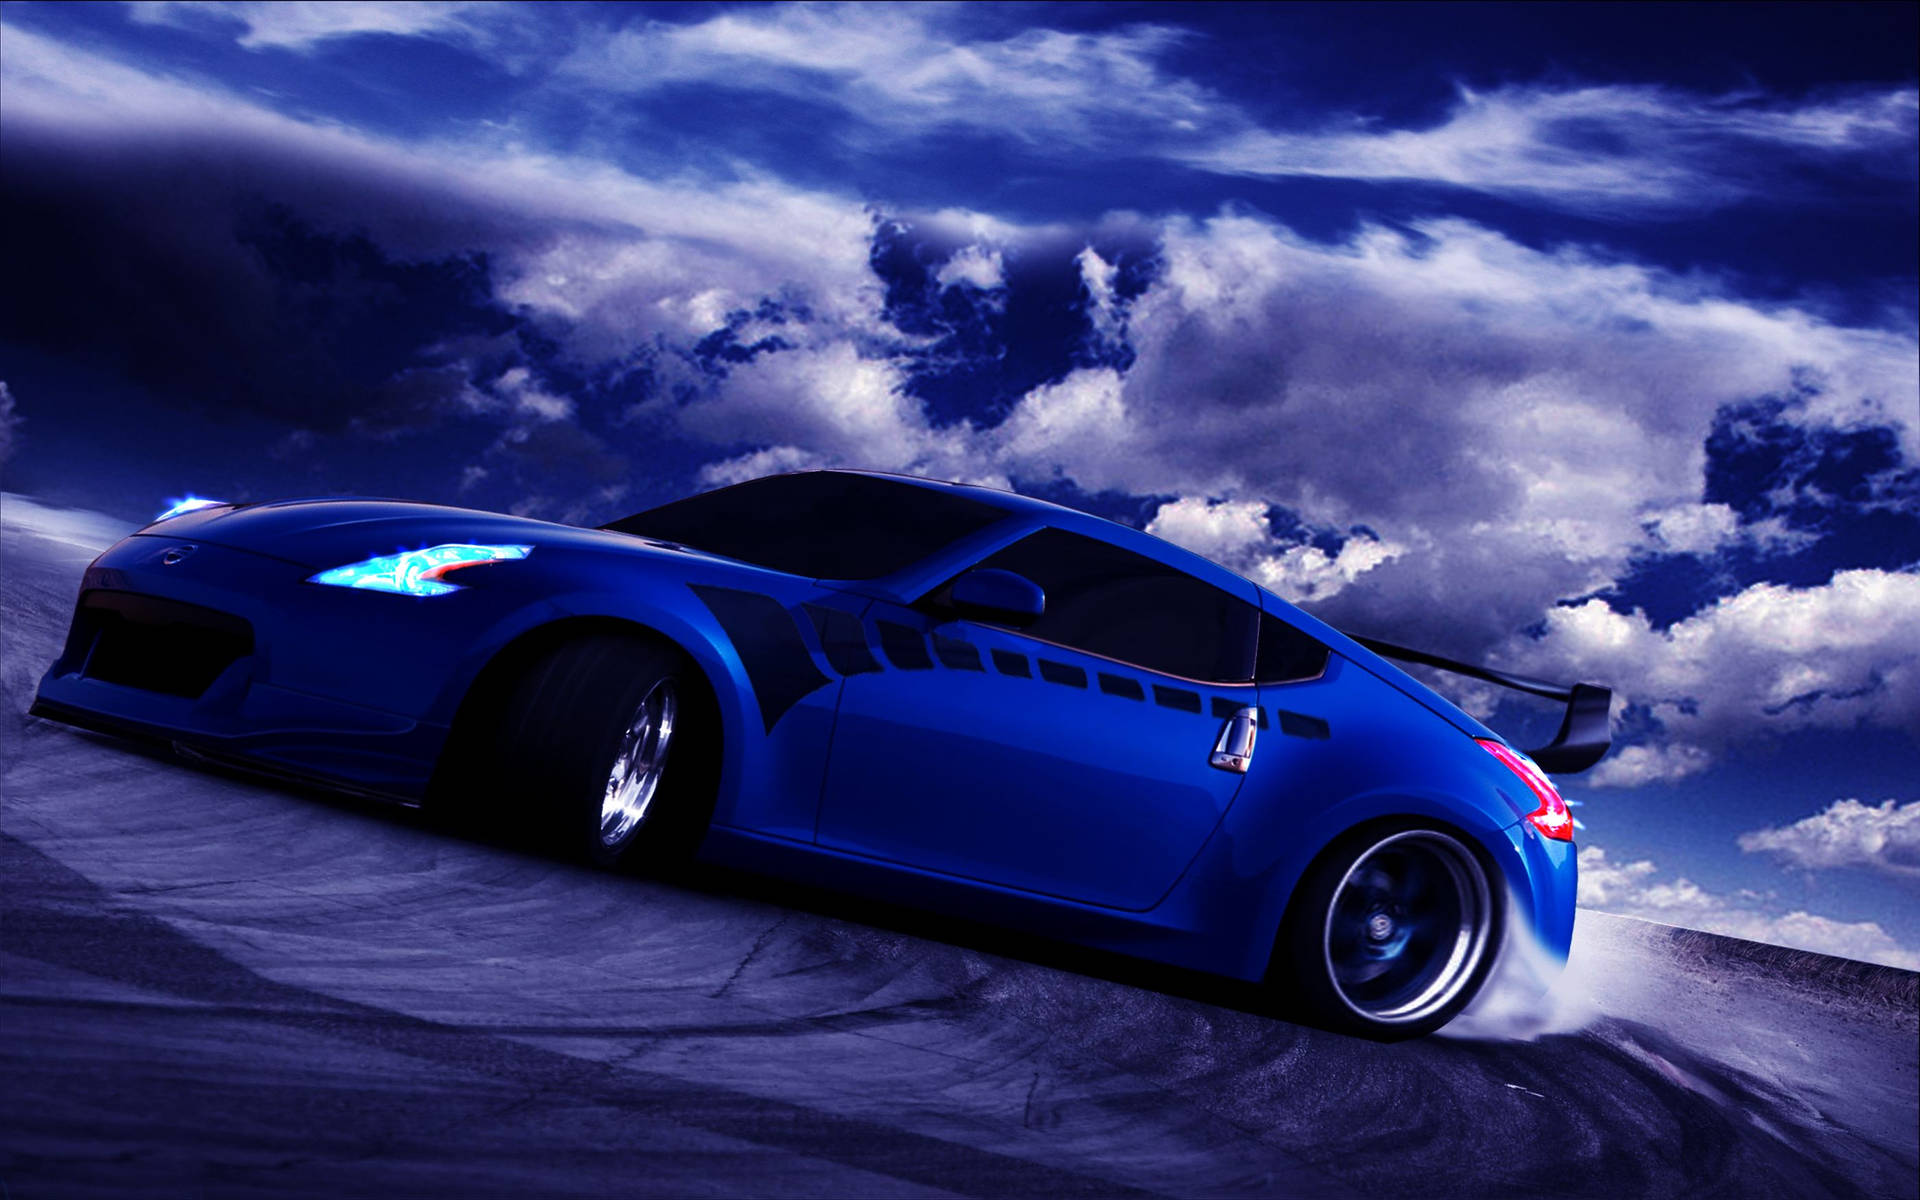 Nissan 370z With Clouds Wallpaper